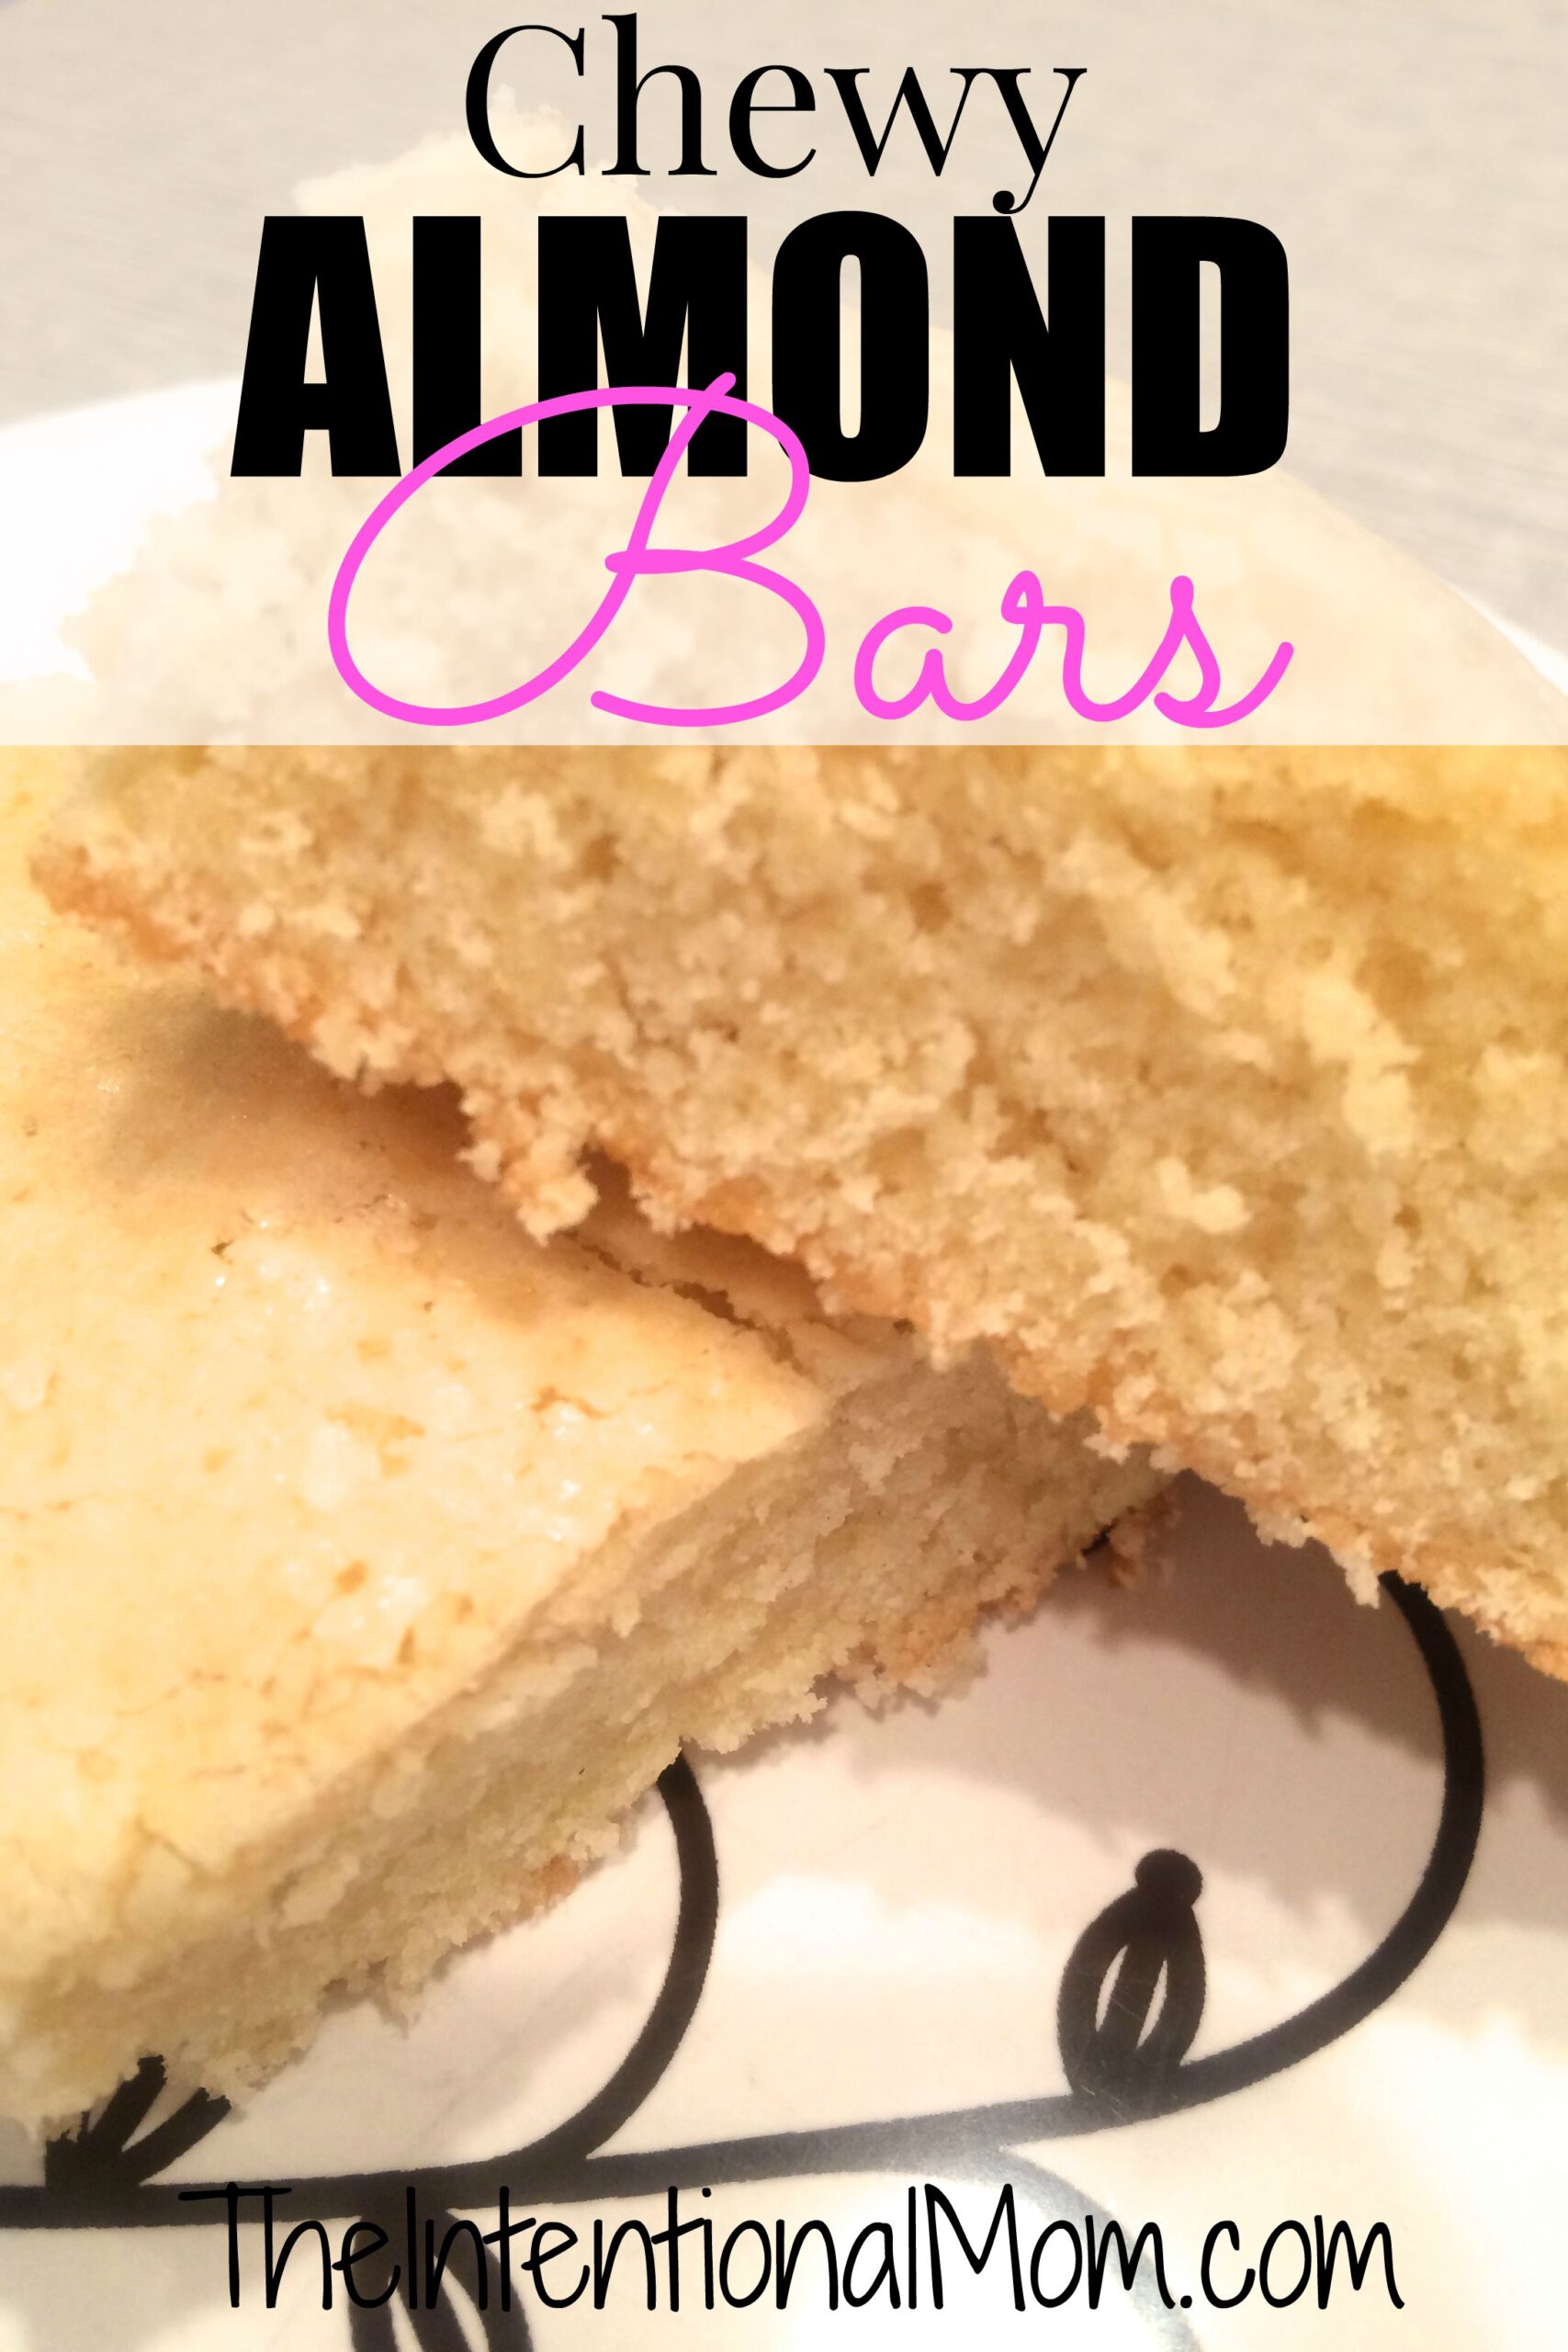 Recipe: Chewy Almond Bars